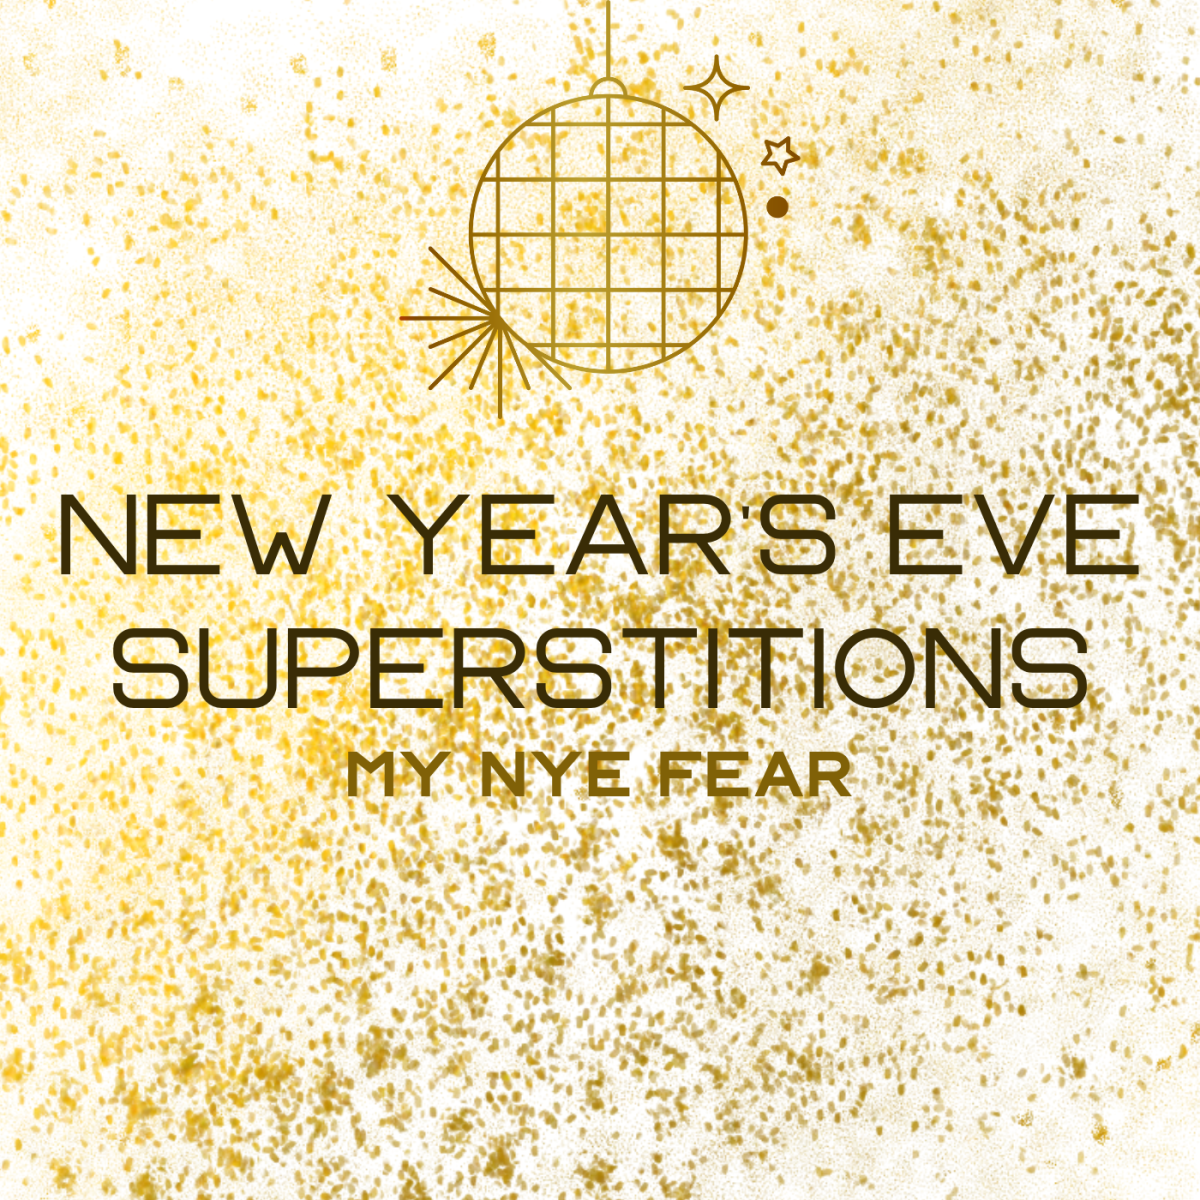 New Year's Eve Superstitions